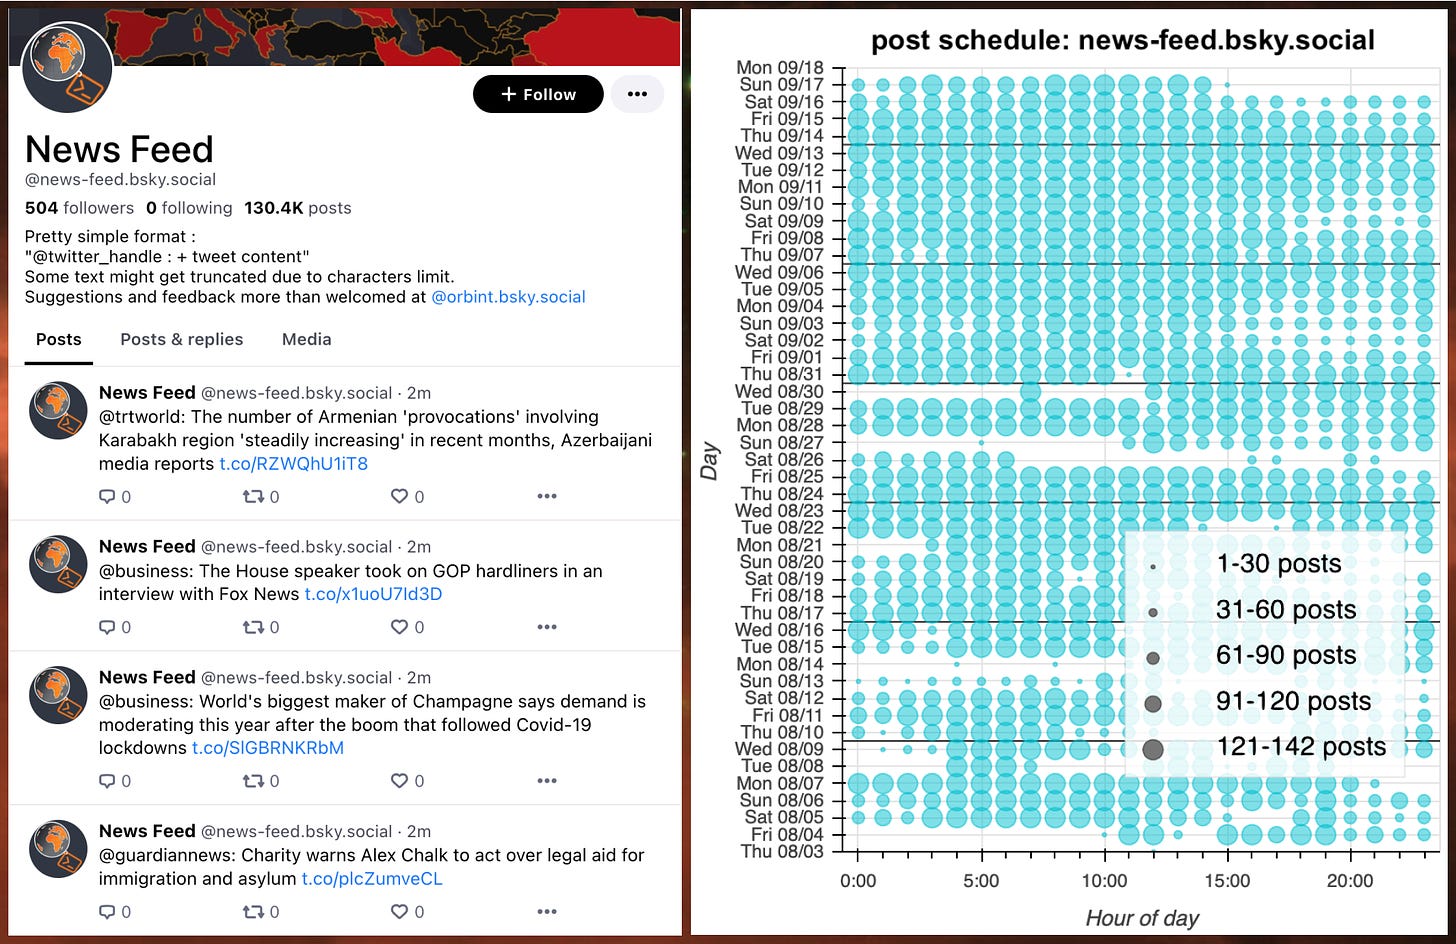 screenshot of news-feed.bsky.social's profile and hourly posting schedule plot for news-feed.bsky.social